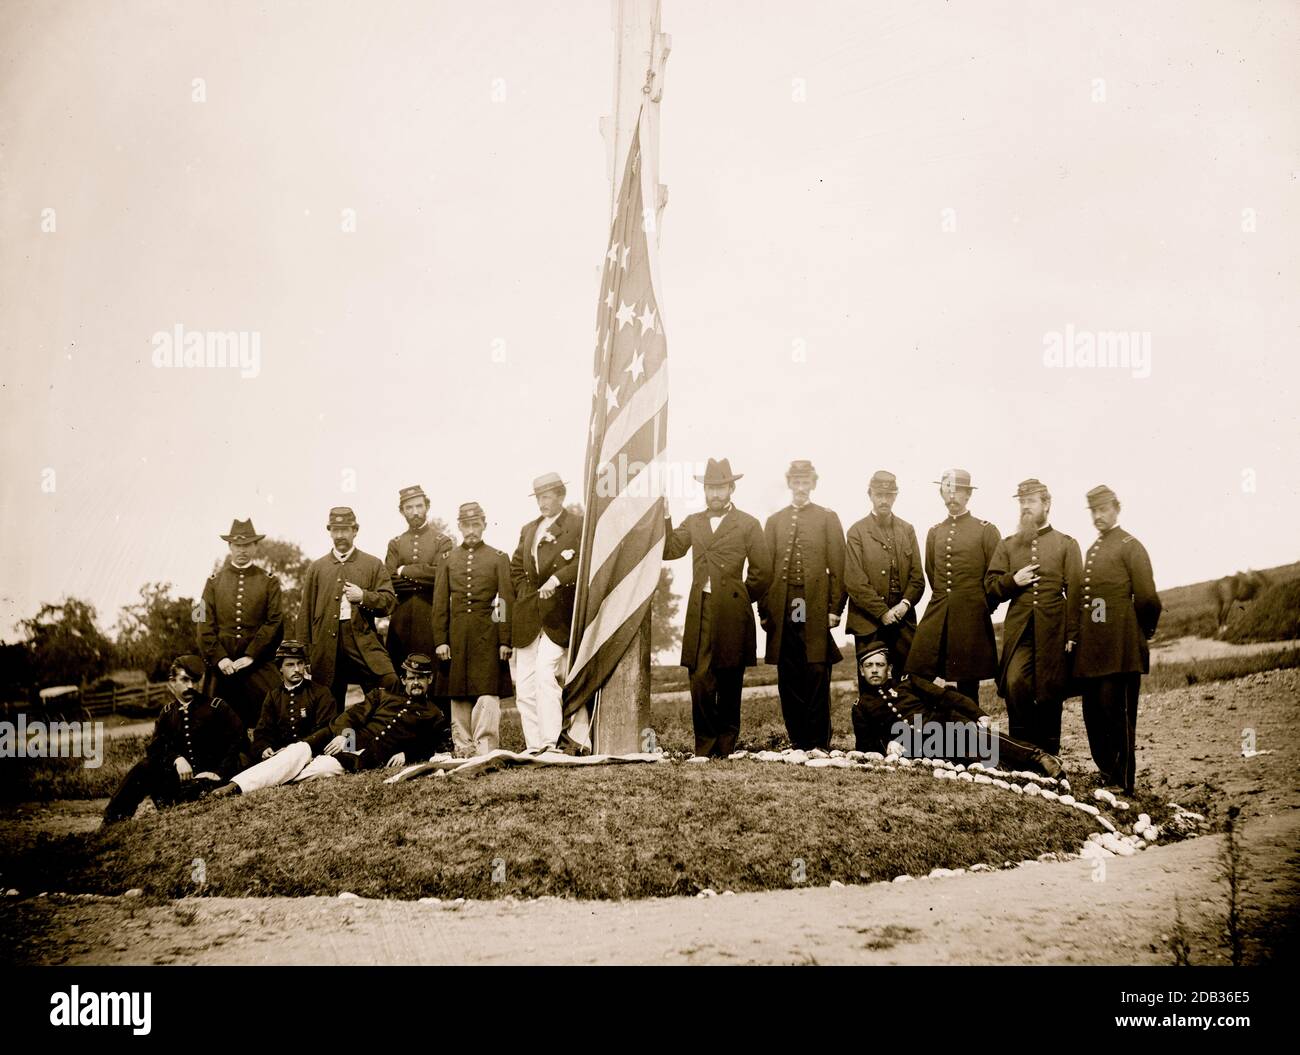 Washington, D.C. Signal Corps officers lowering flag at their camp near Georgetown; Gen Albert J. Myer, in civilian dress, at right of pole. Stock Photo